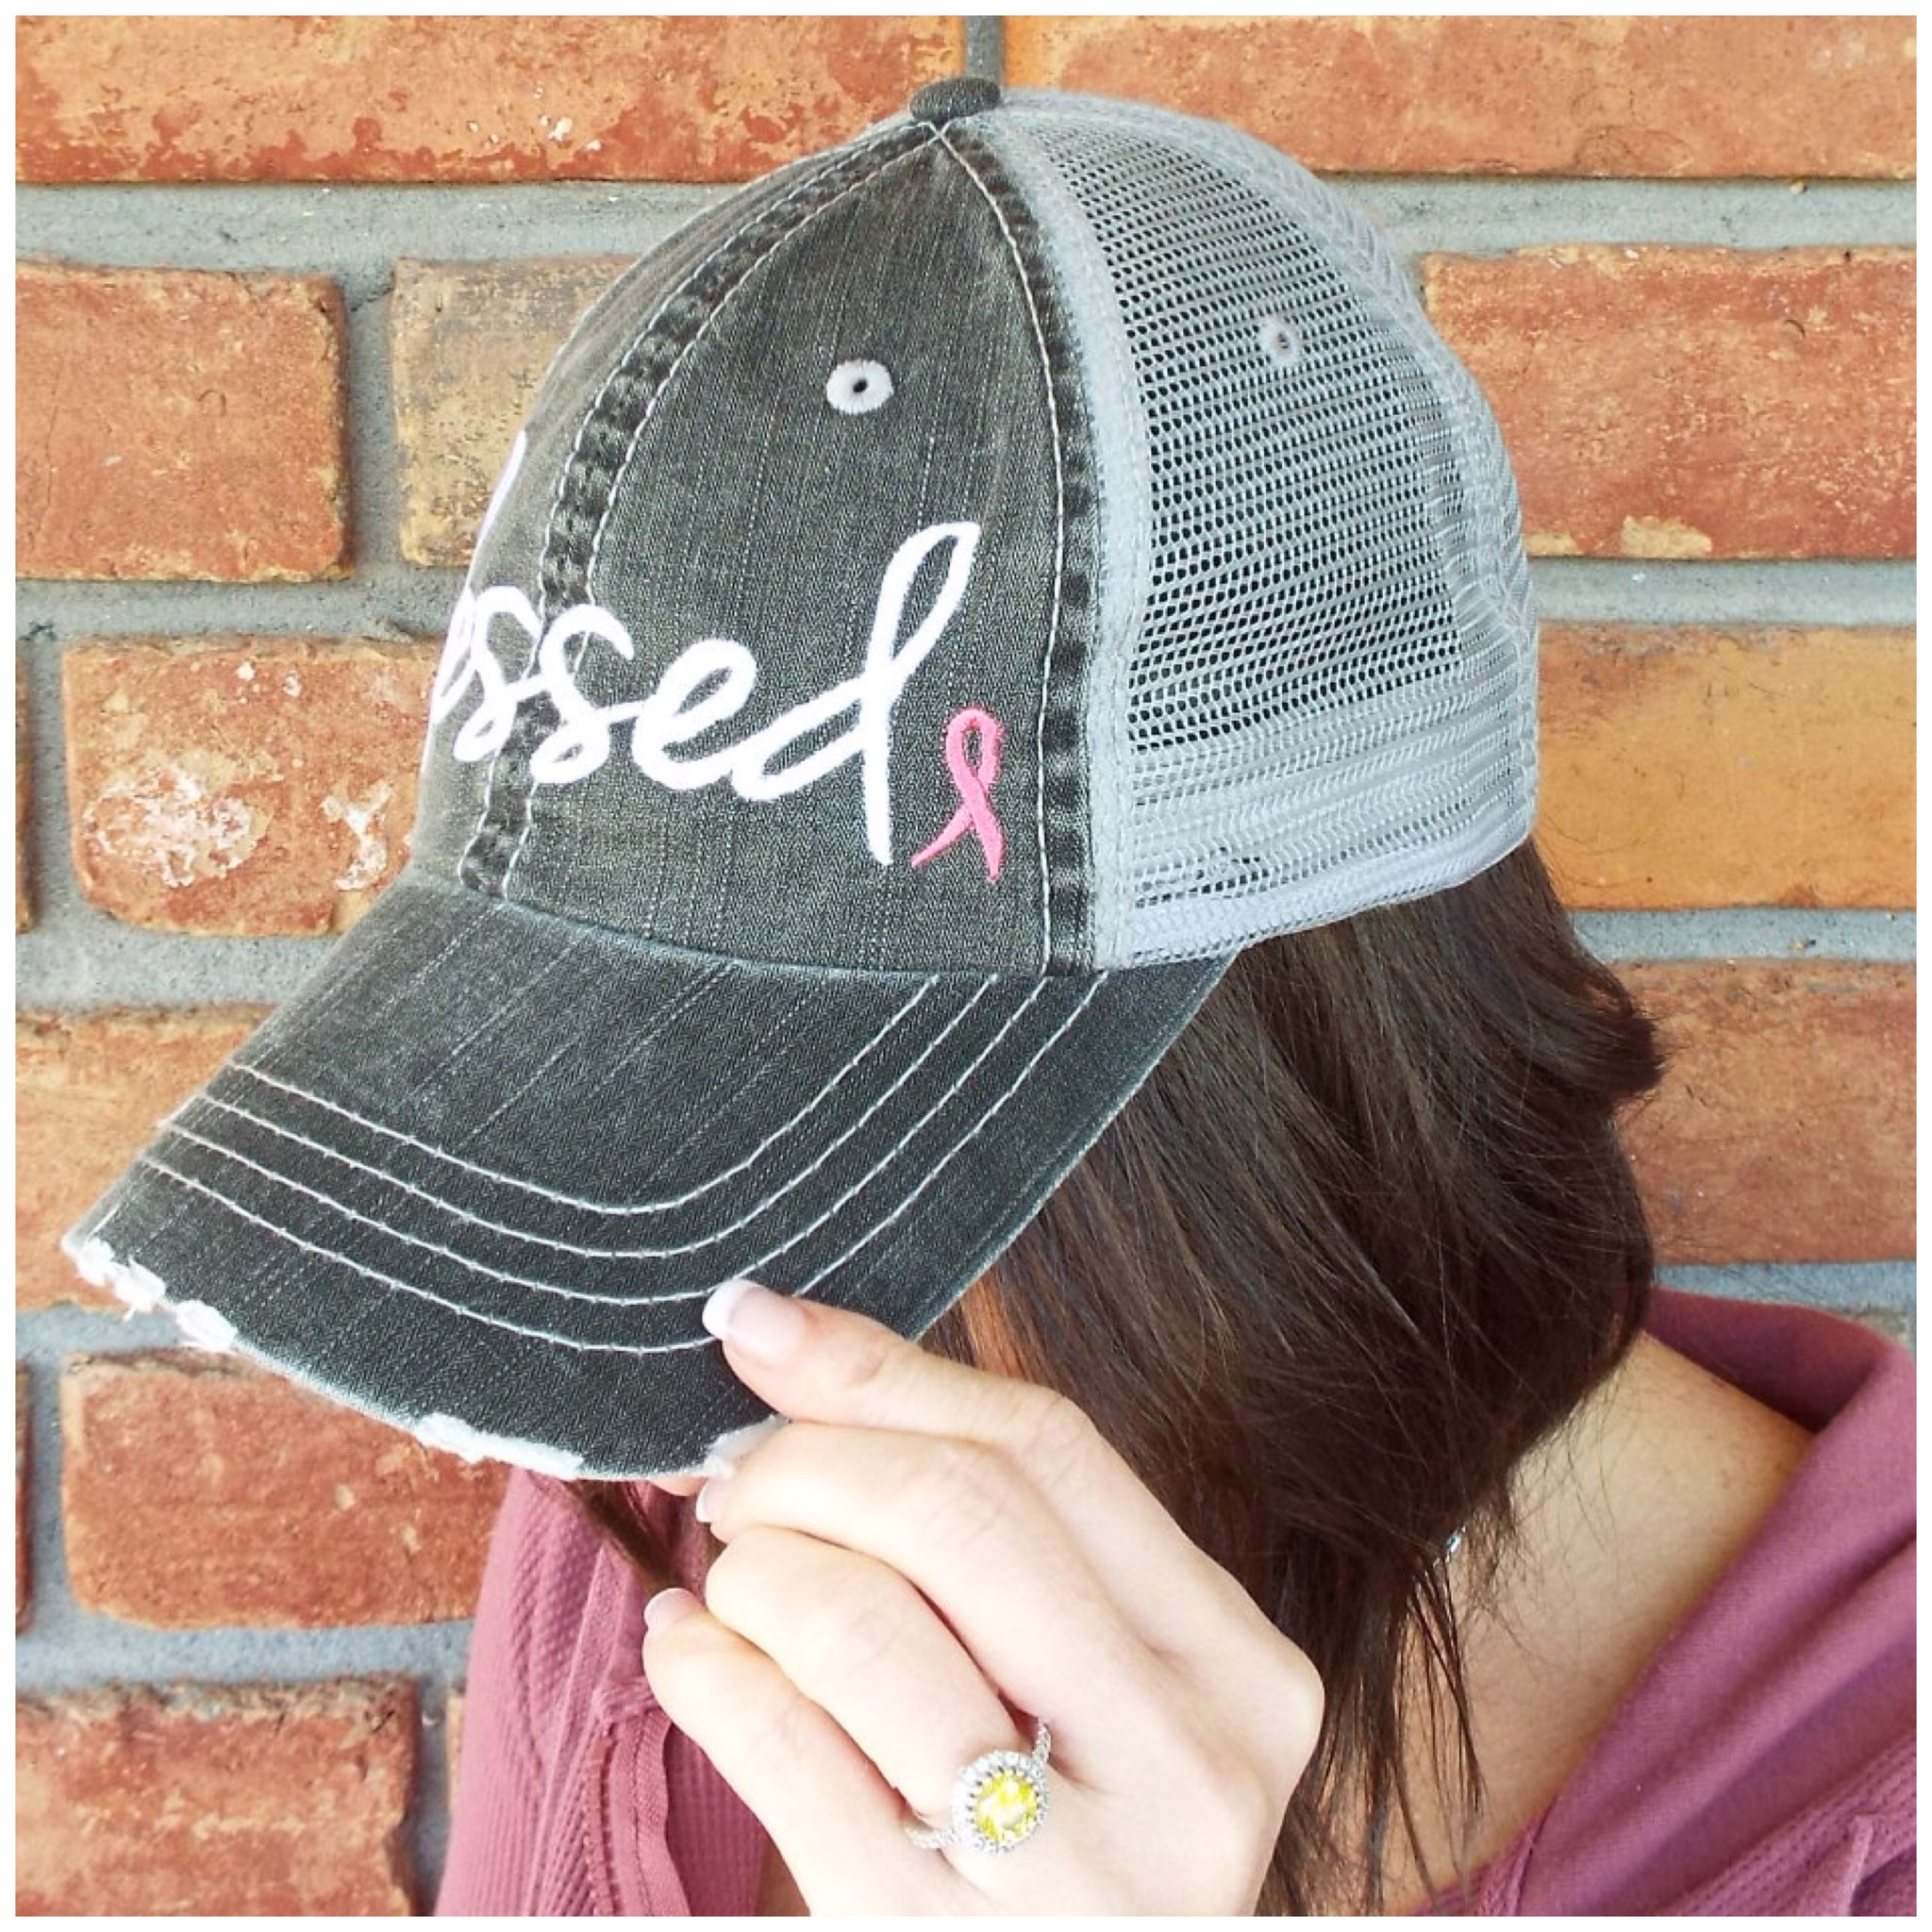 “Blessed” Pink Cancer Ribbon Distressed Embroidered Trucker Hat Mess Back Dark Gray